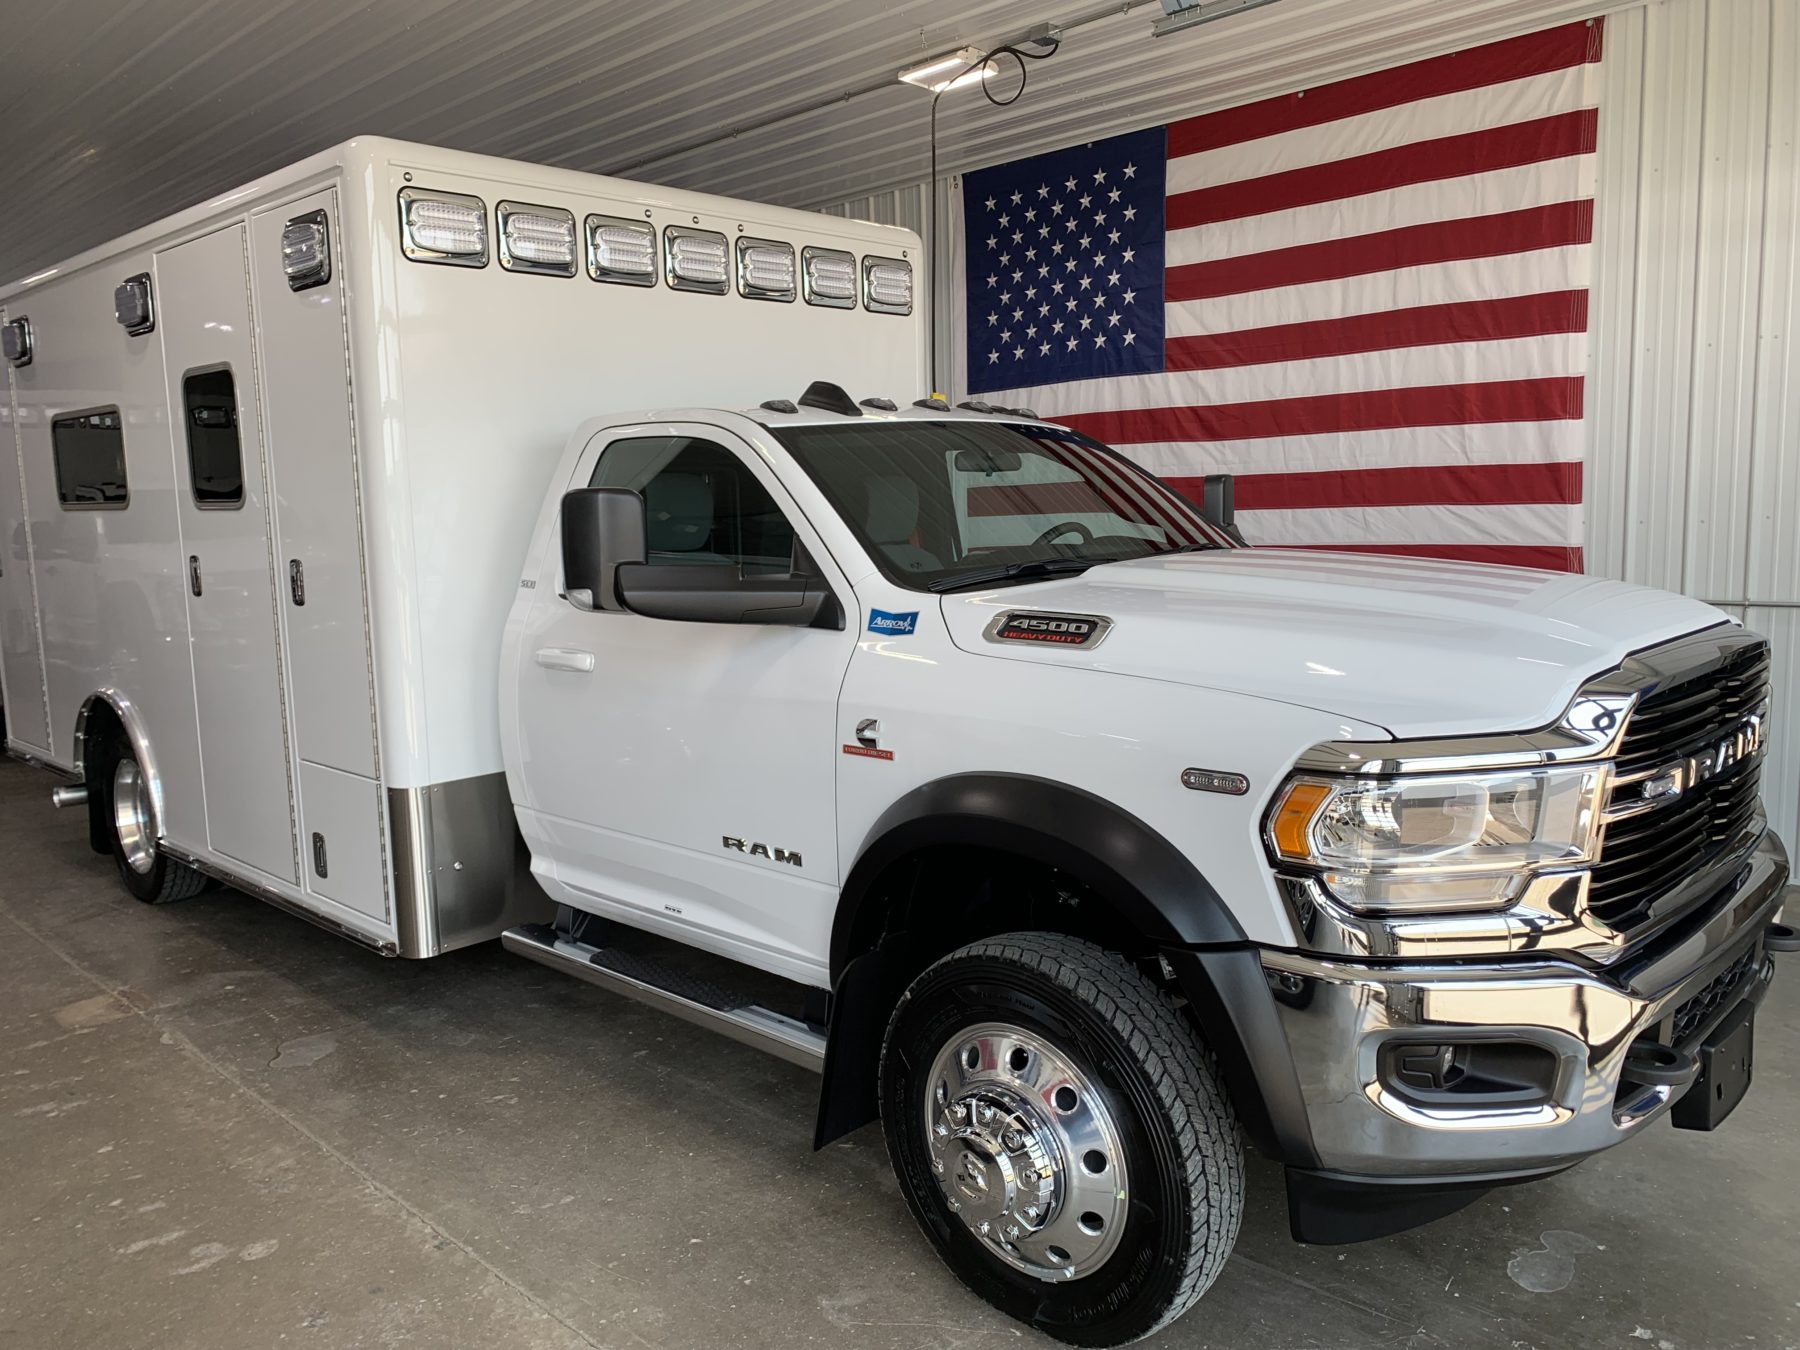 2021 Ram 4500 4x4 Heavy Duty Ambulance For Sale – Picture 8